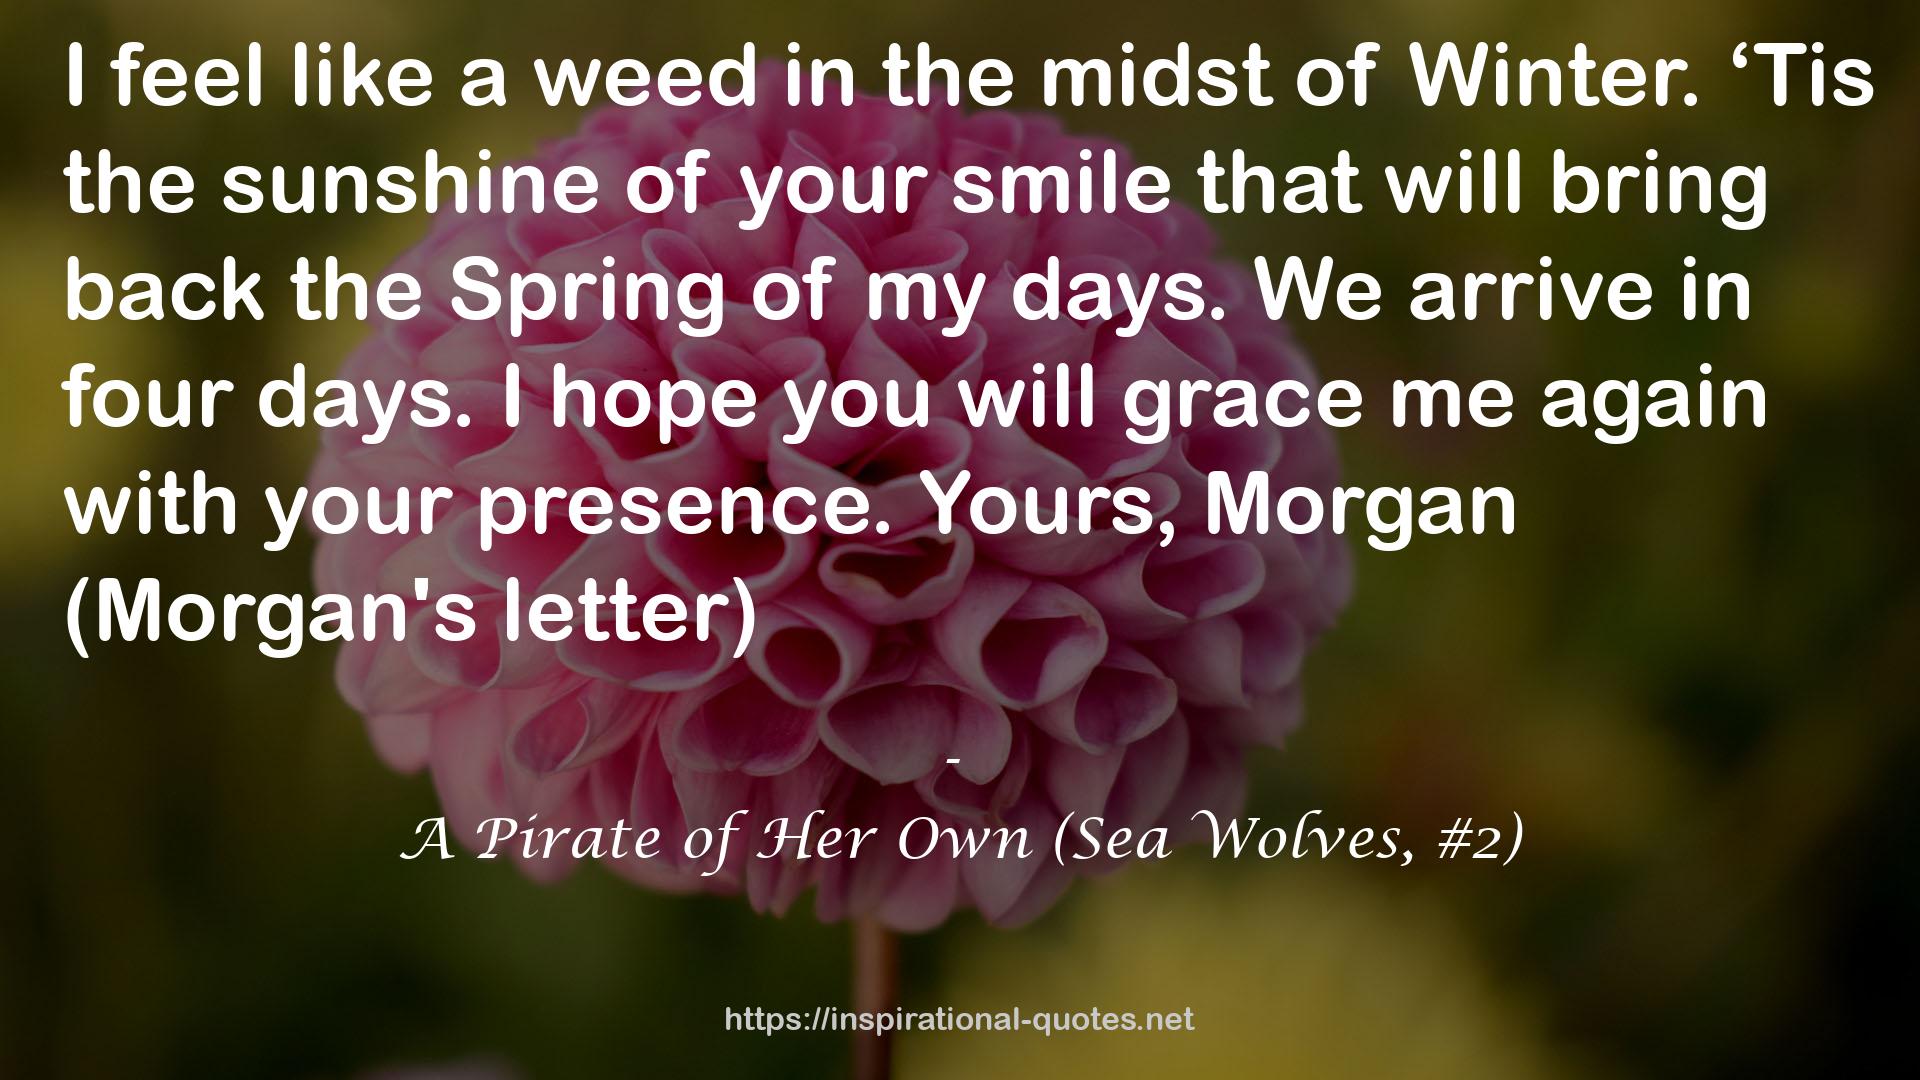 A Pirate of Her Own (Sea Wolves, #2) QUOTES